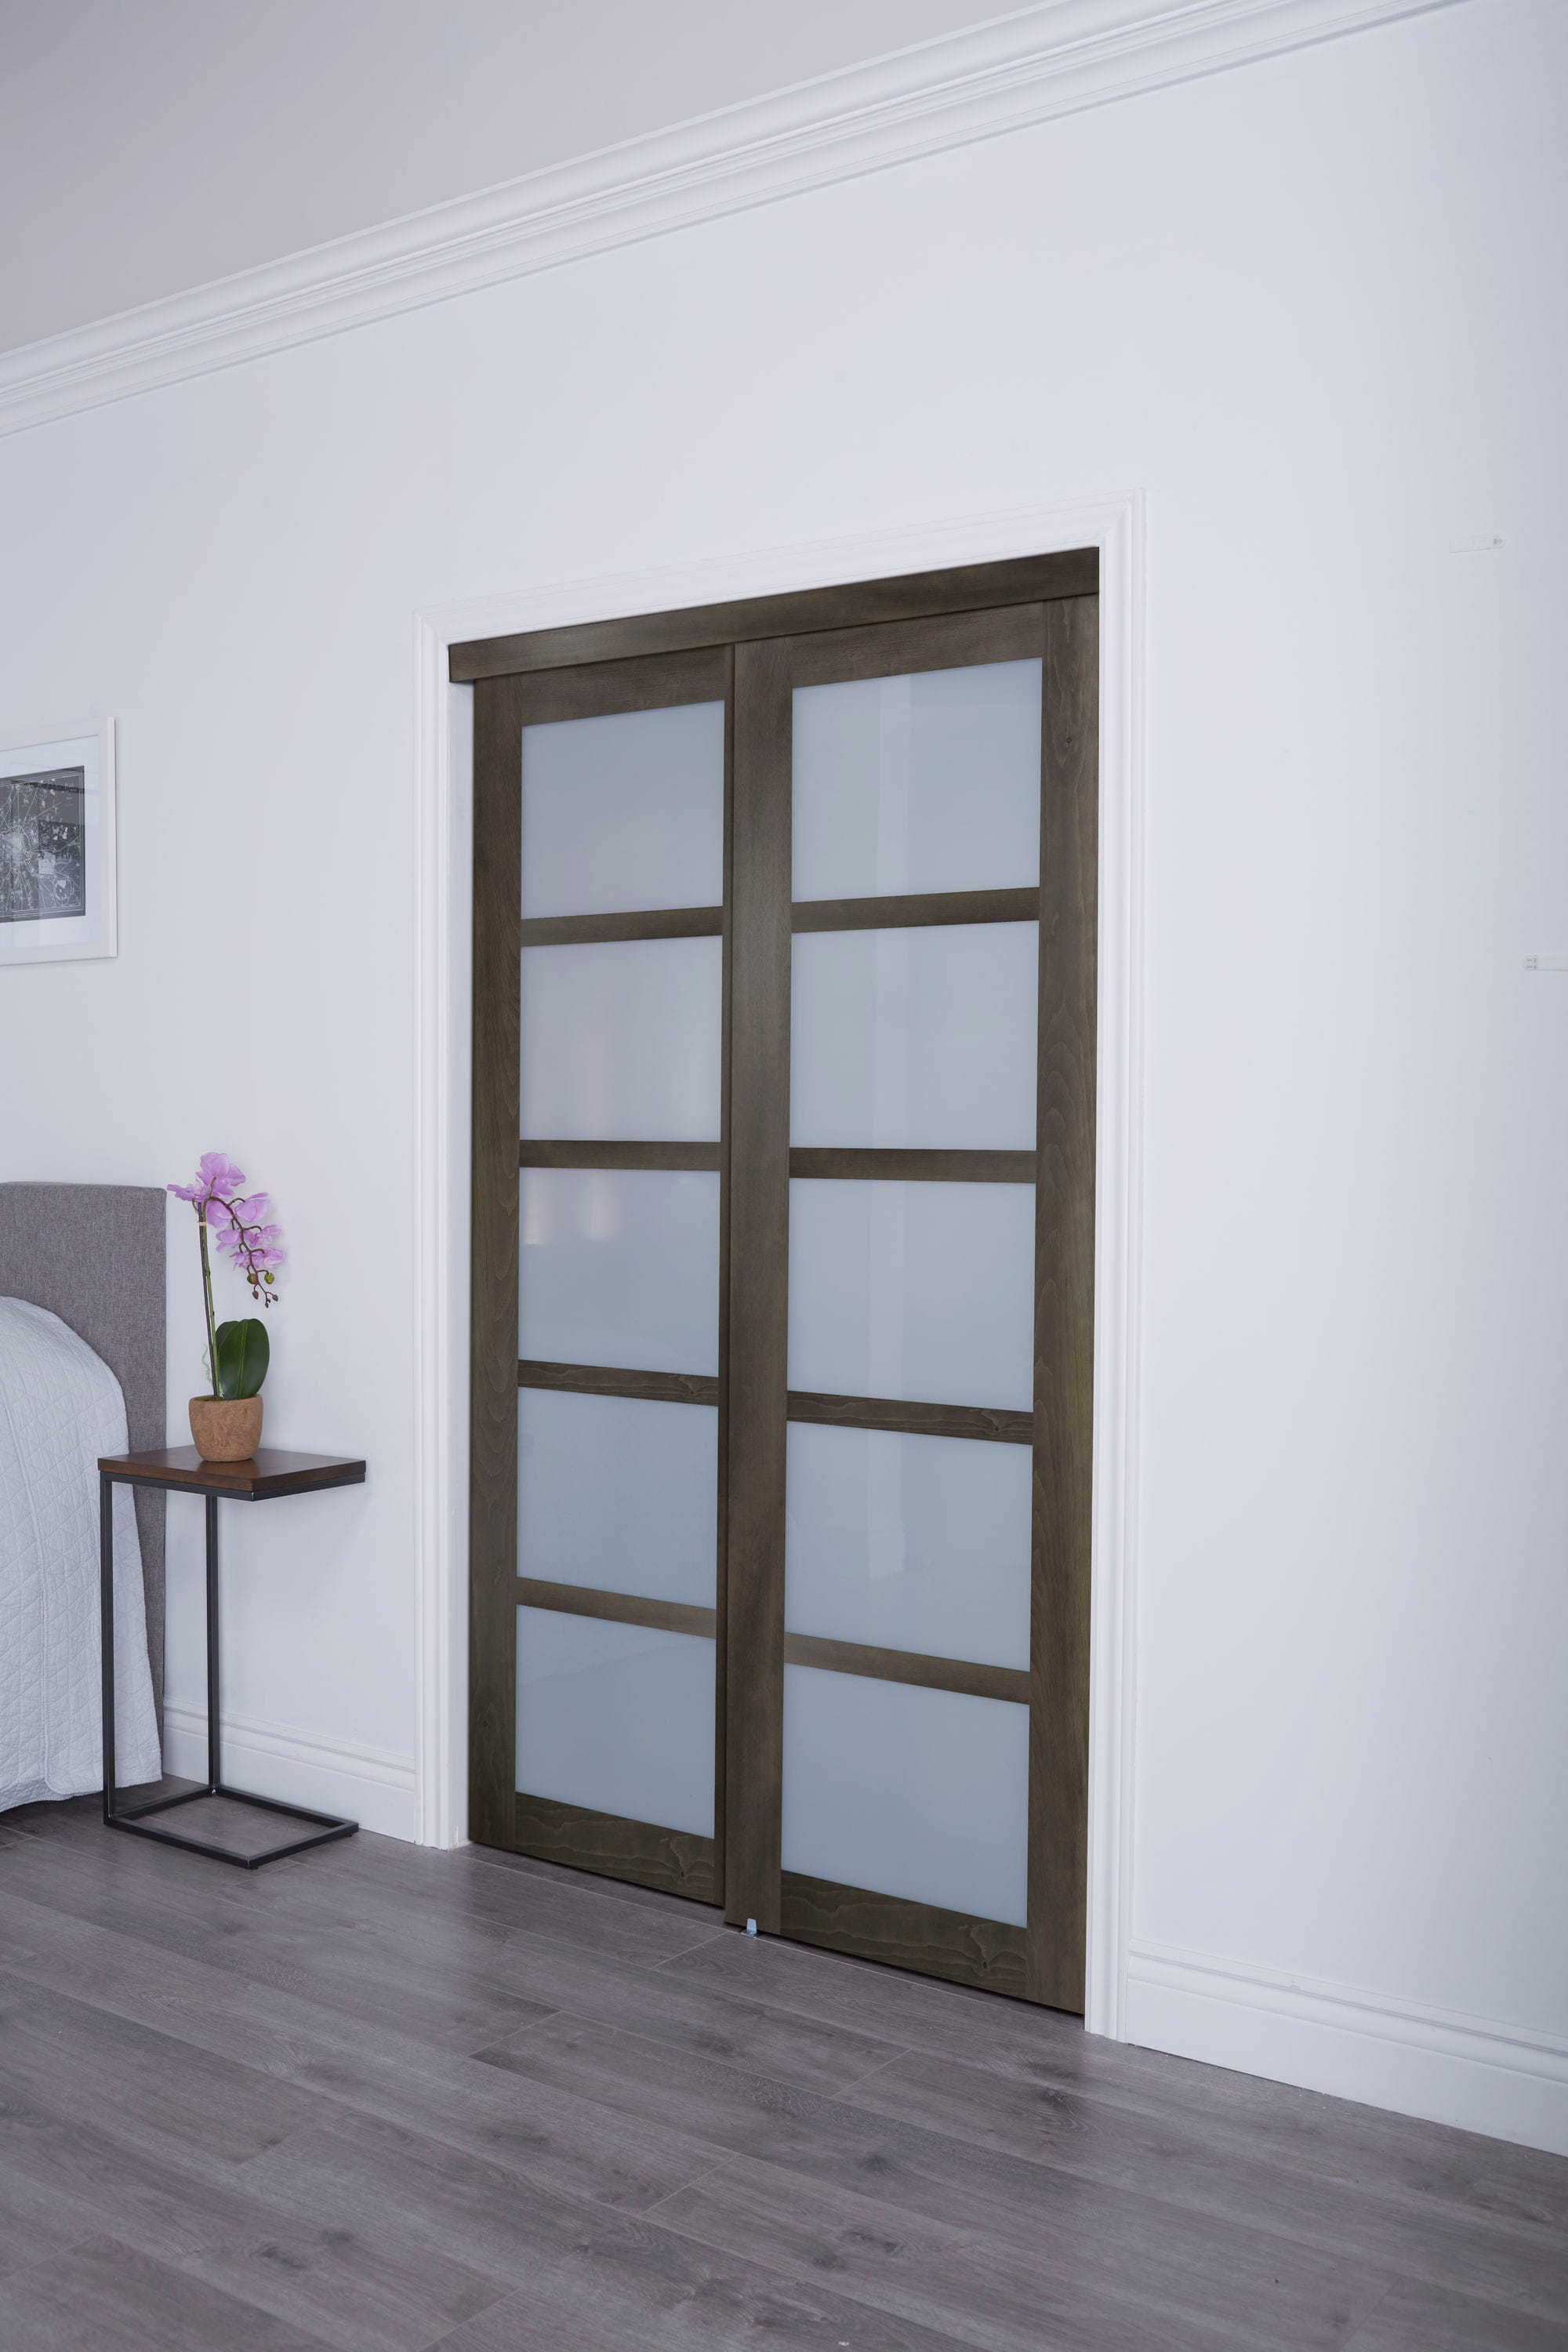 RELIABILT Euro 60-in x 80-in Silver Flush Prefinished Mdf Sliding Door  Hardware Included in the Closet Doors department at